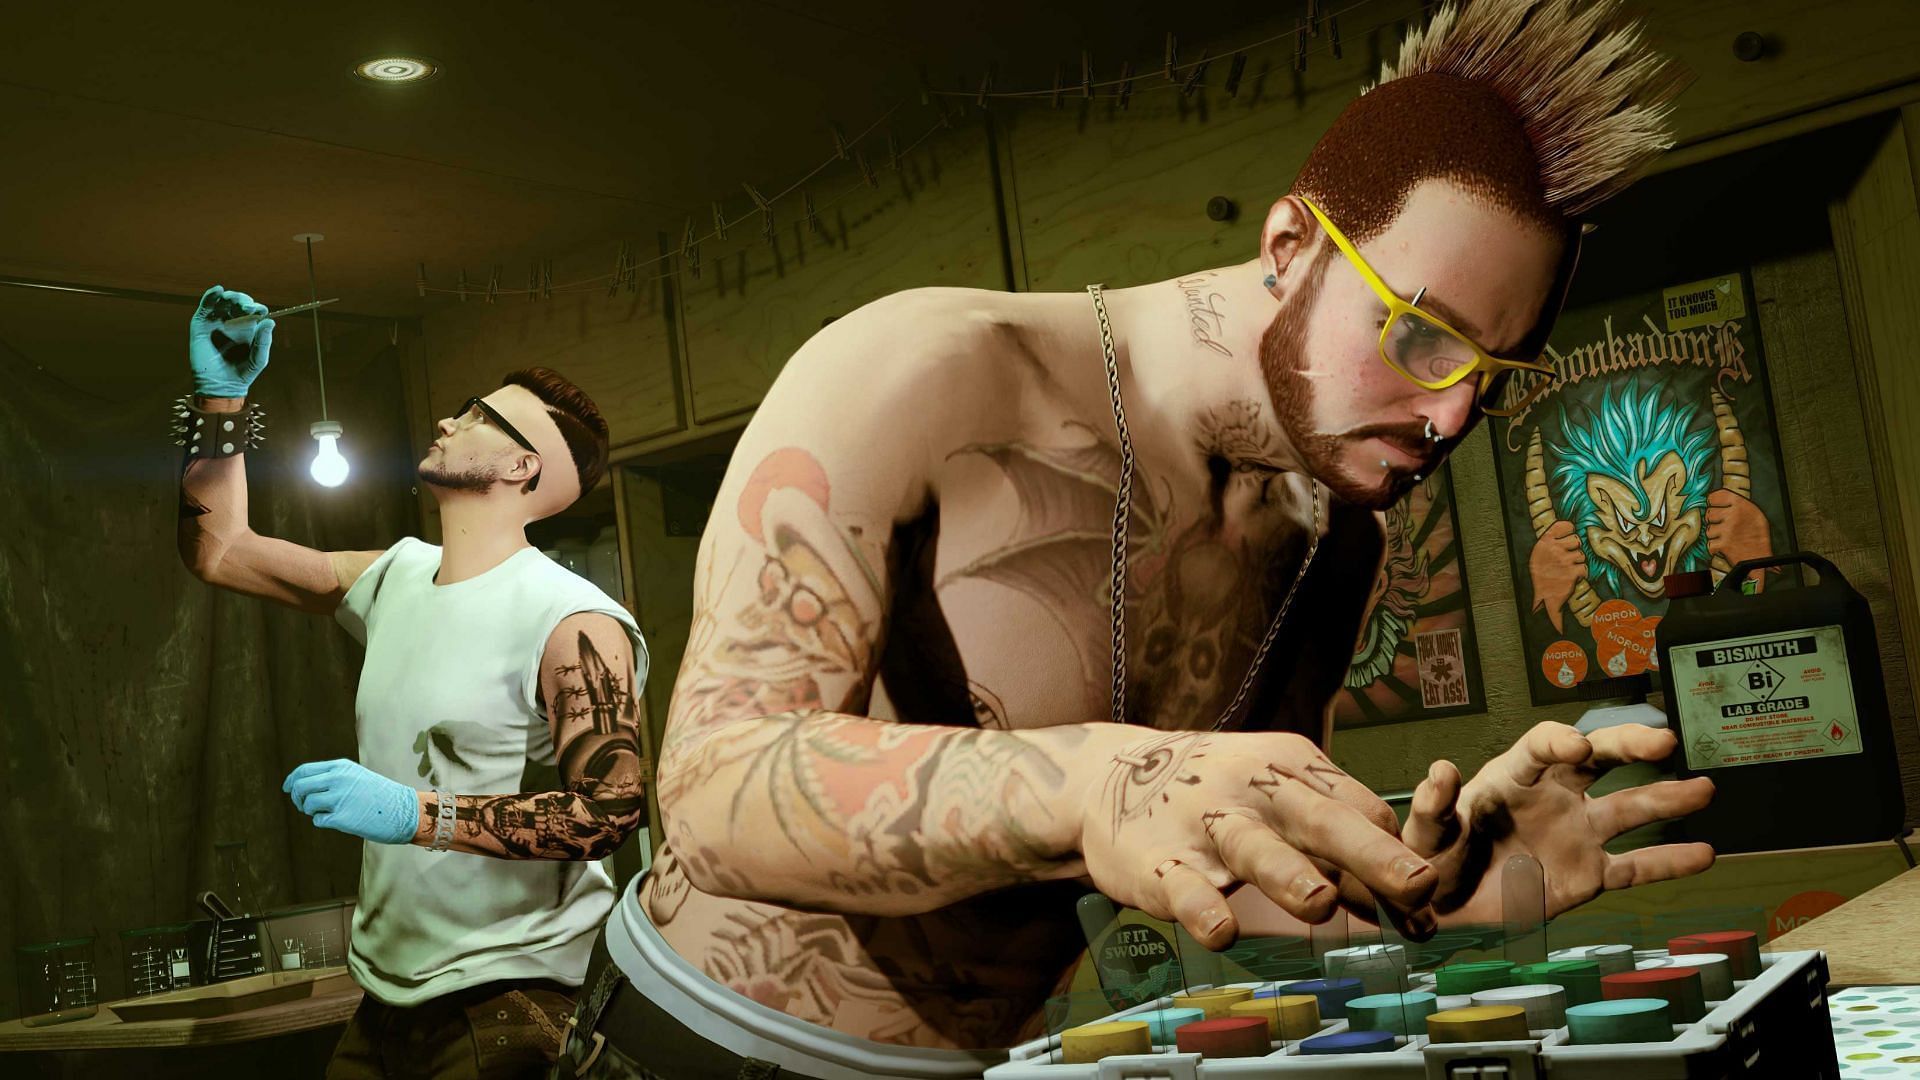 A promotional image associated with this business (Image via Rockstar Games)